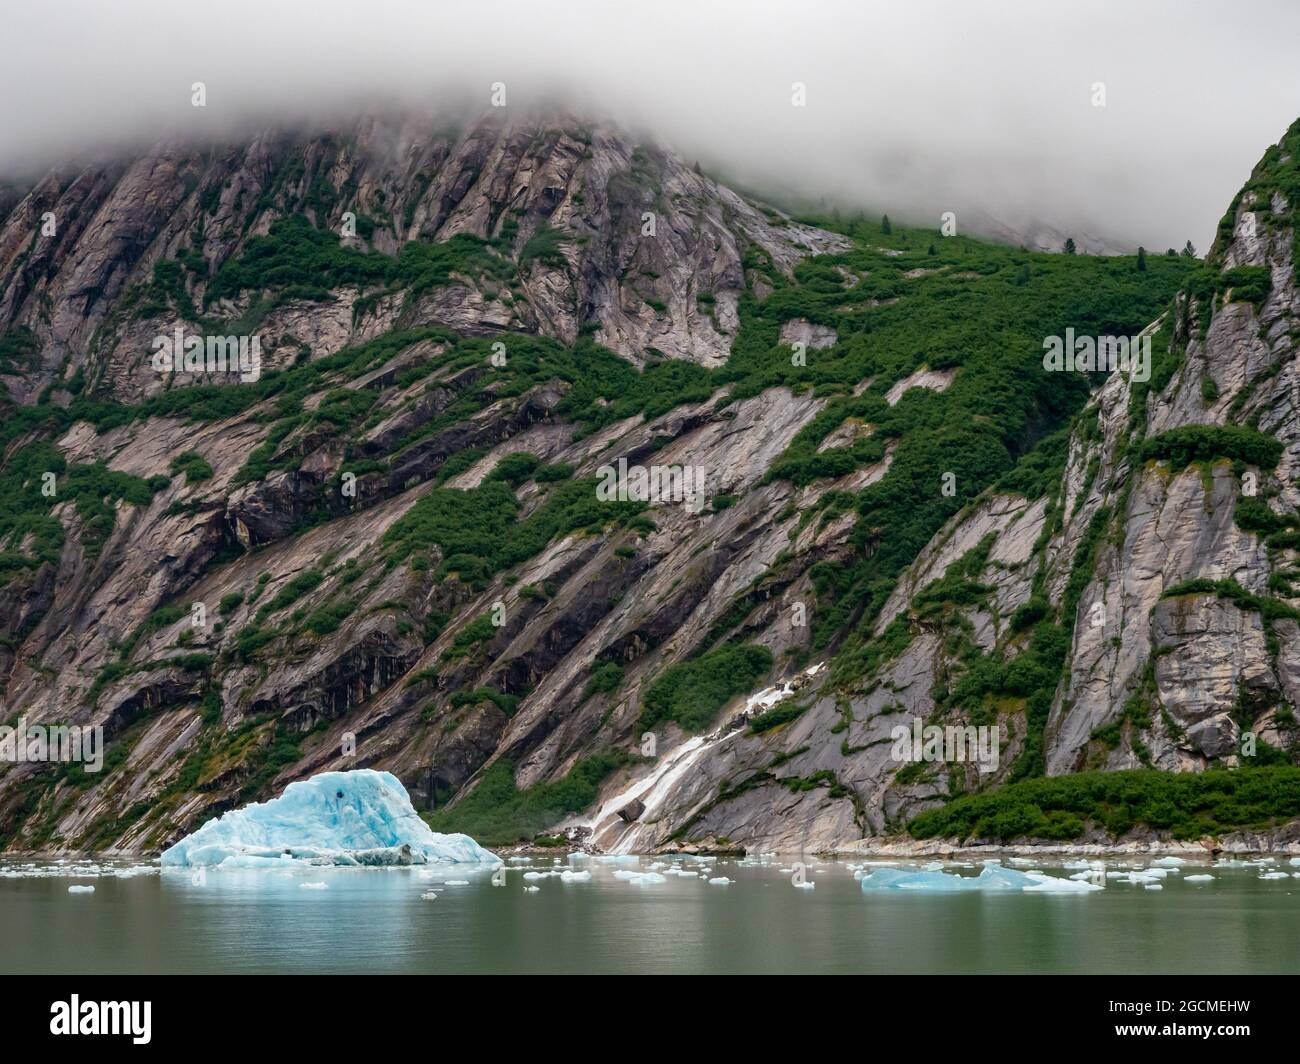 The stunning scenery of Endicott arm, a glacially carved fjord in Southeast Alaska, USA Stock Photo